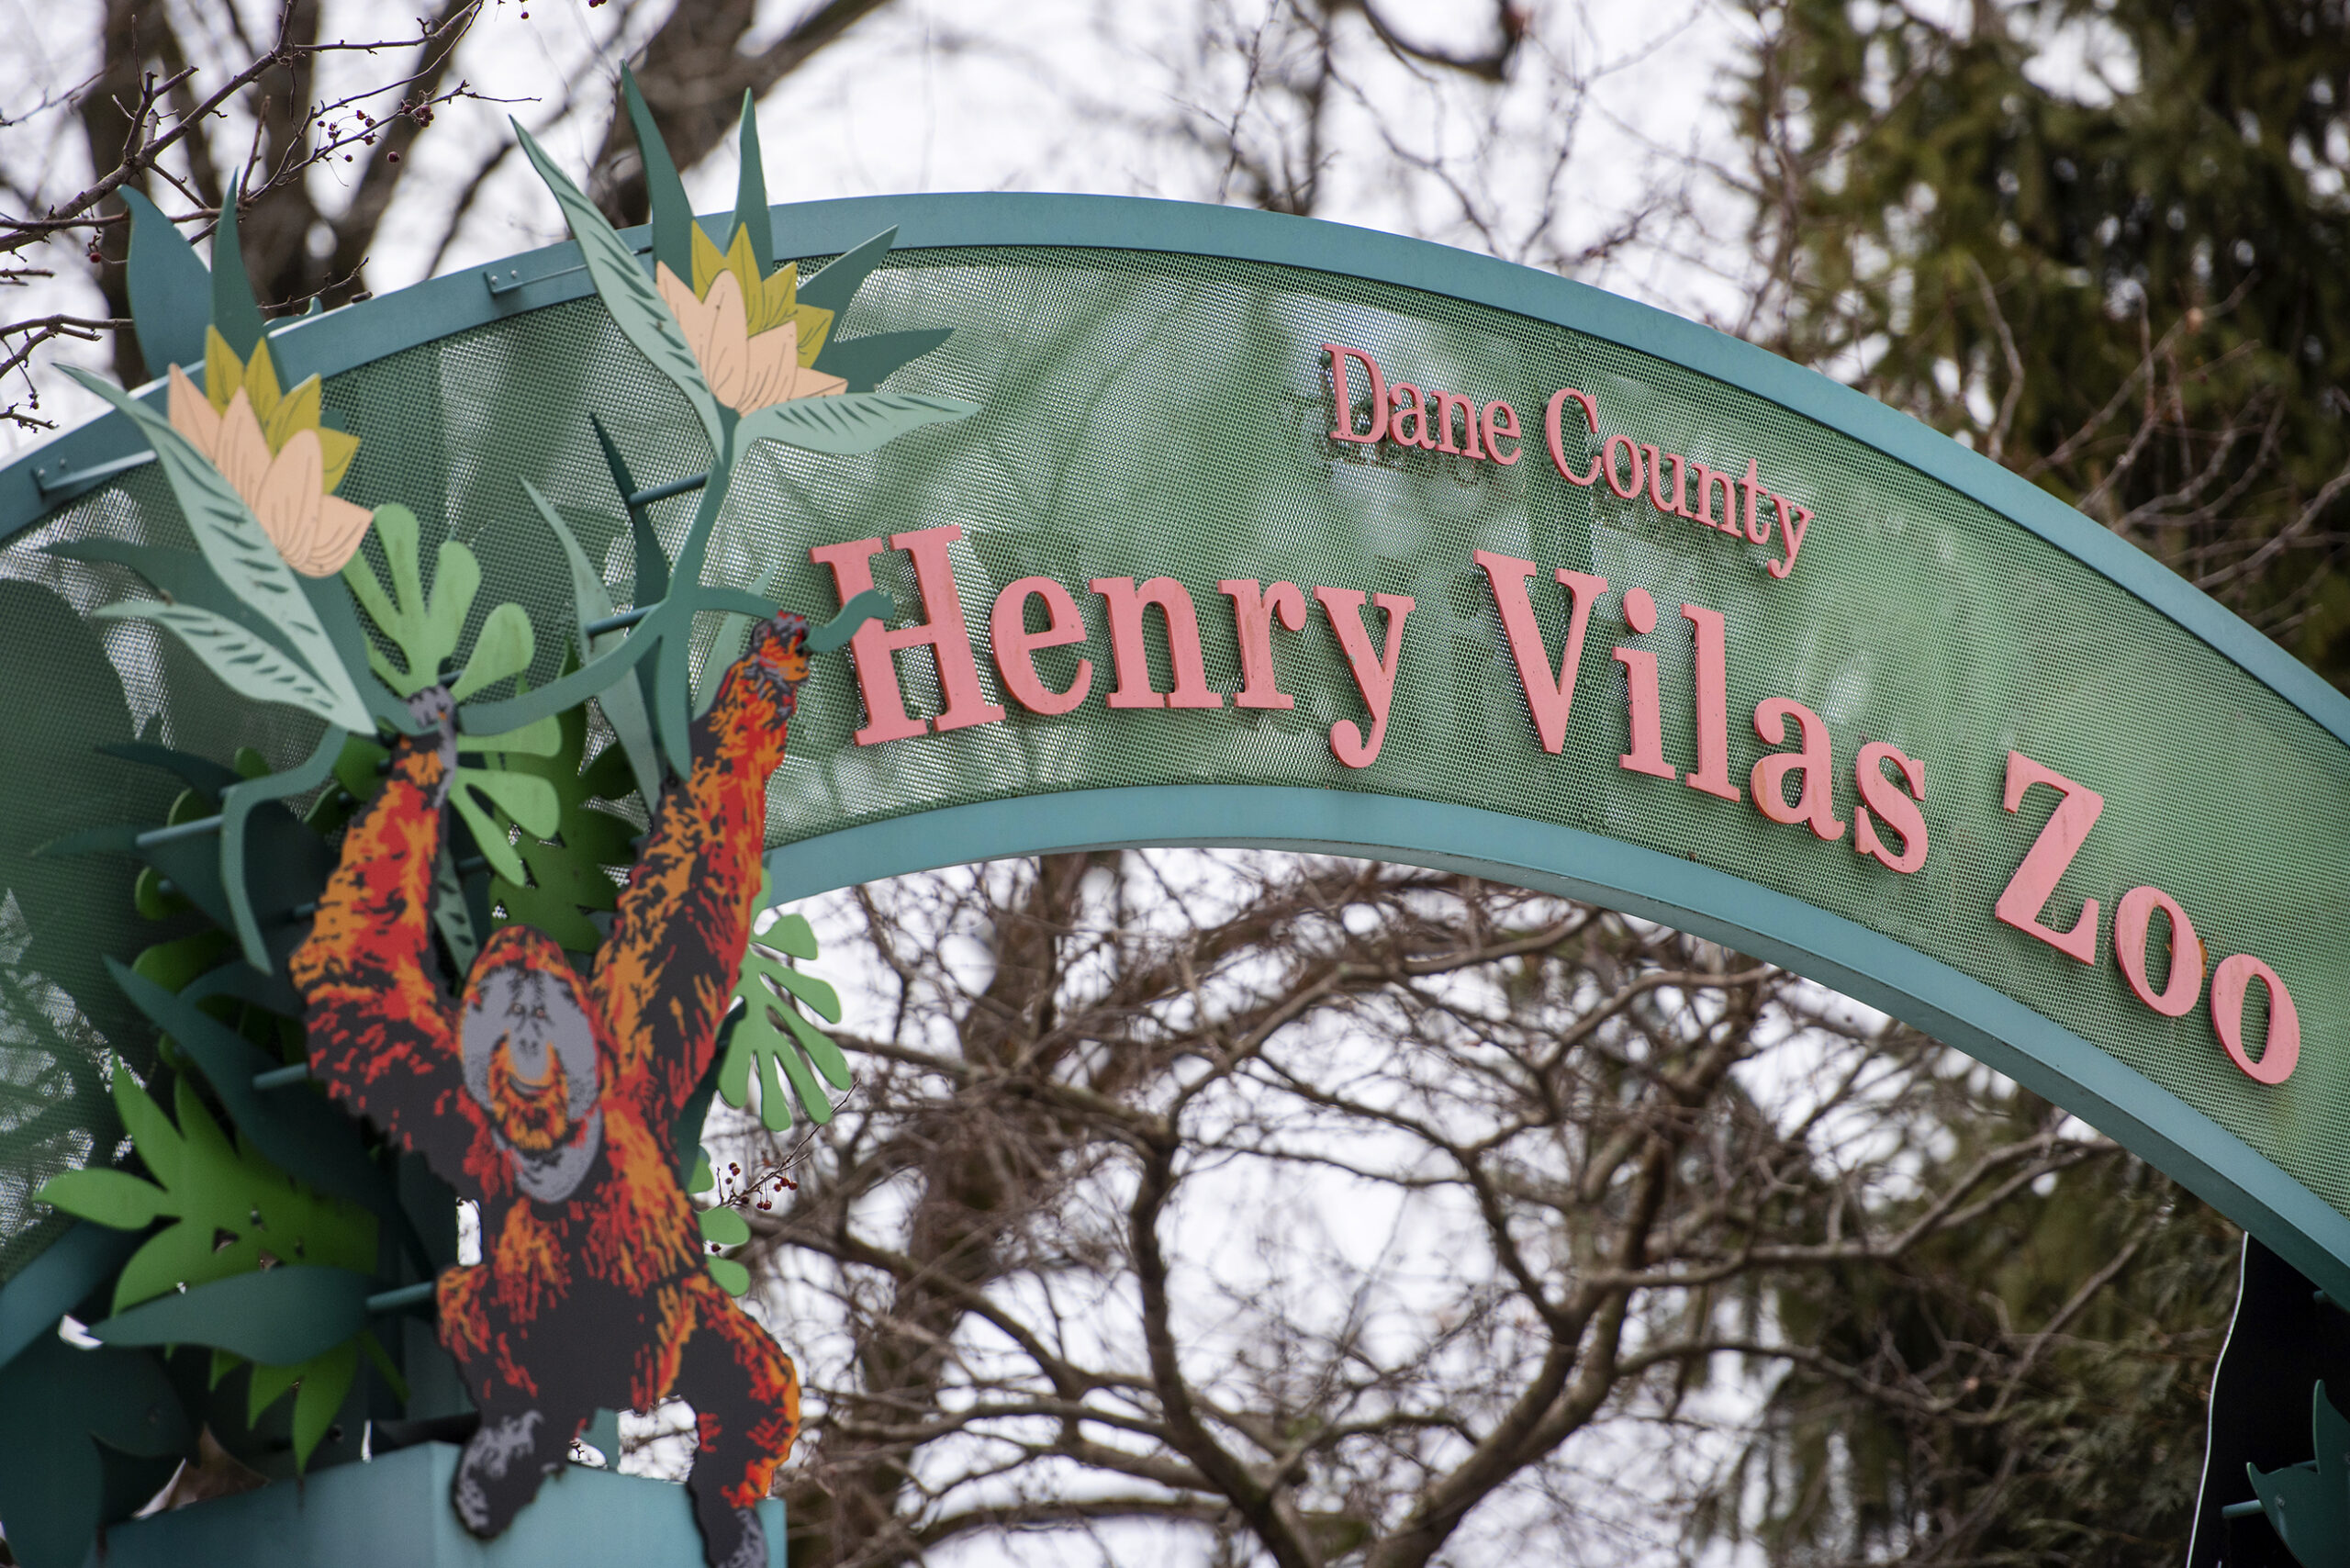 A green archway displays the words "Dane County Henry Vilas Zoo"